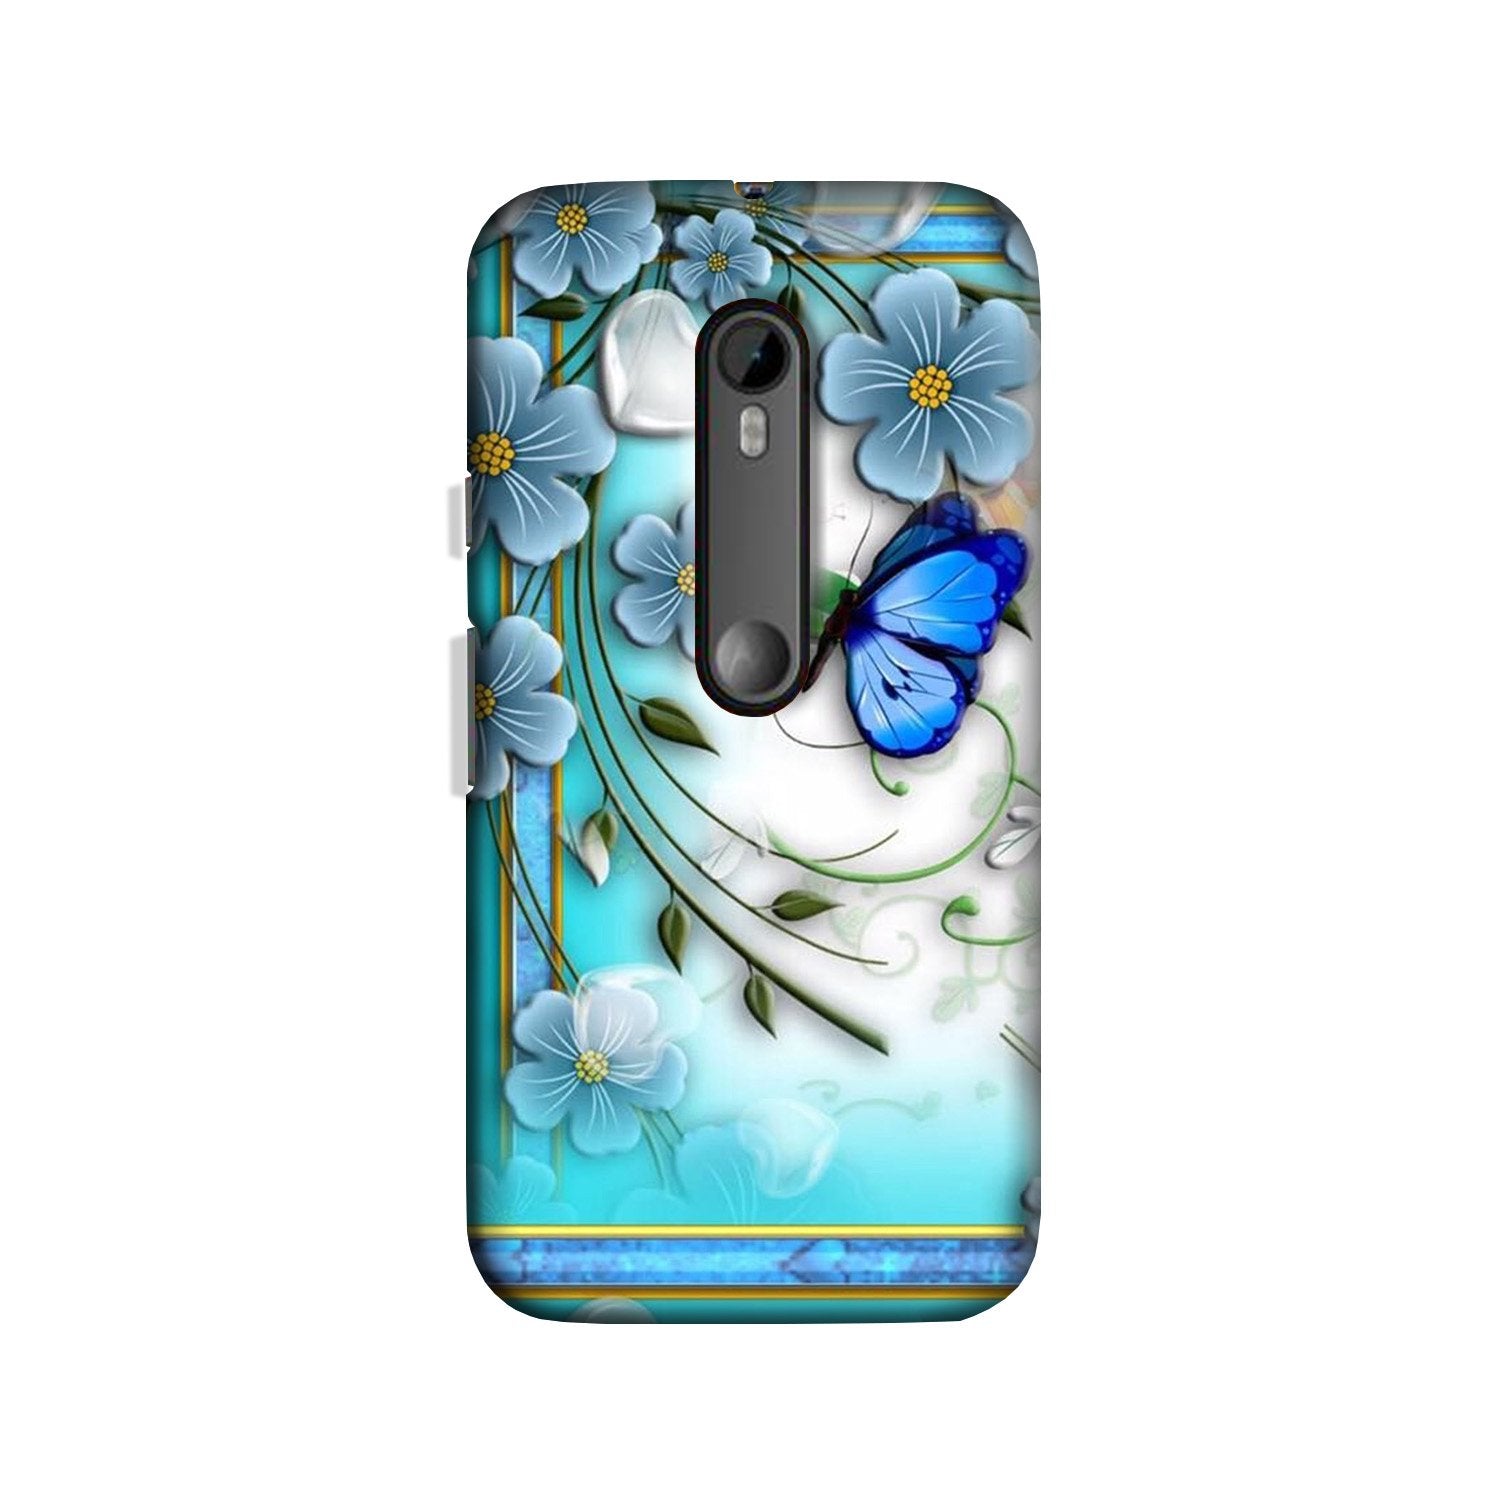 Blue Butterfly Case for Moto G3